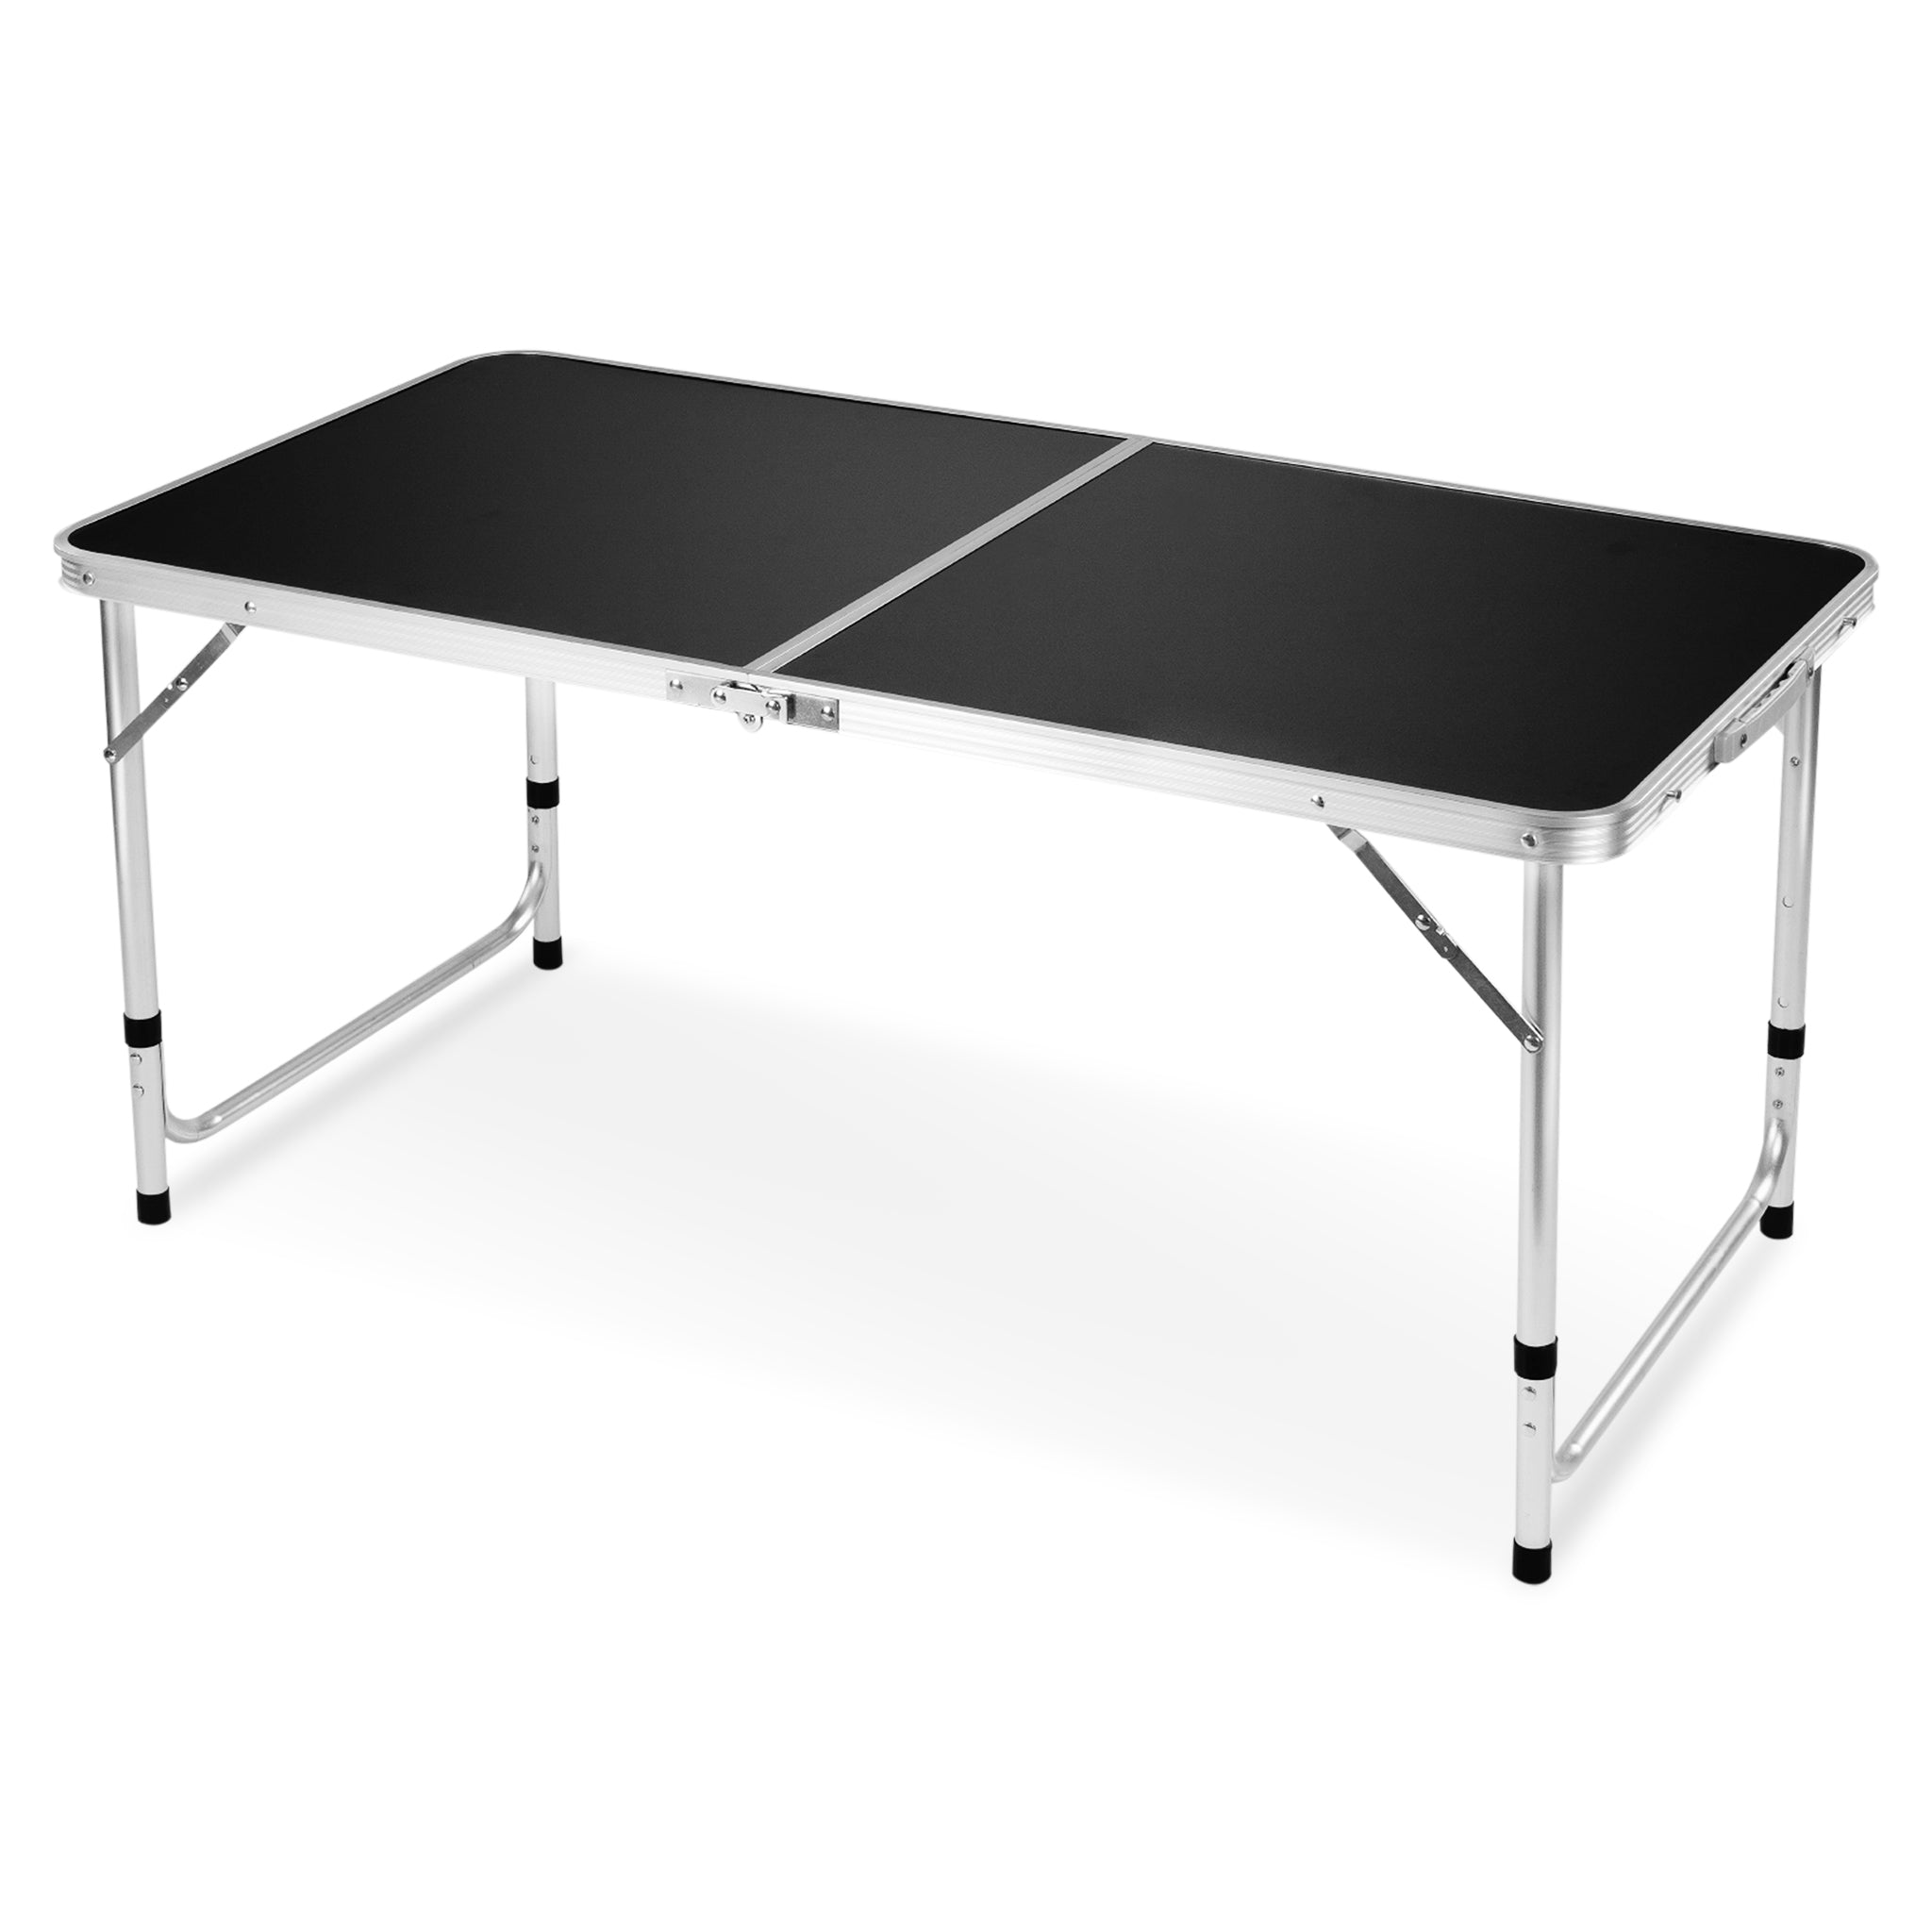 Folding Camping Table, FiveJoy 4 FT Aluminum Height Adjustable 47" x 24"